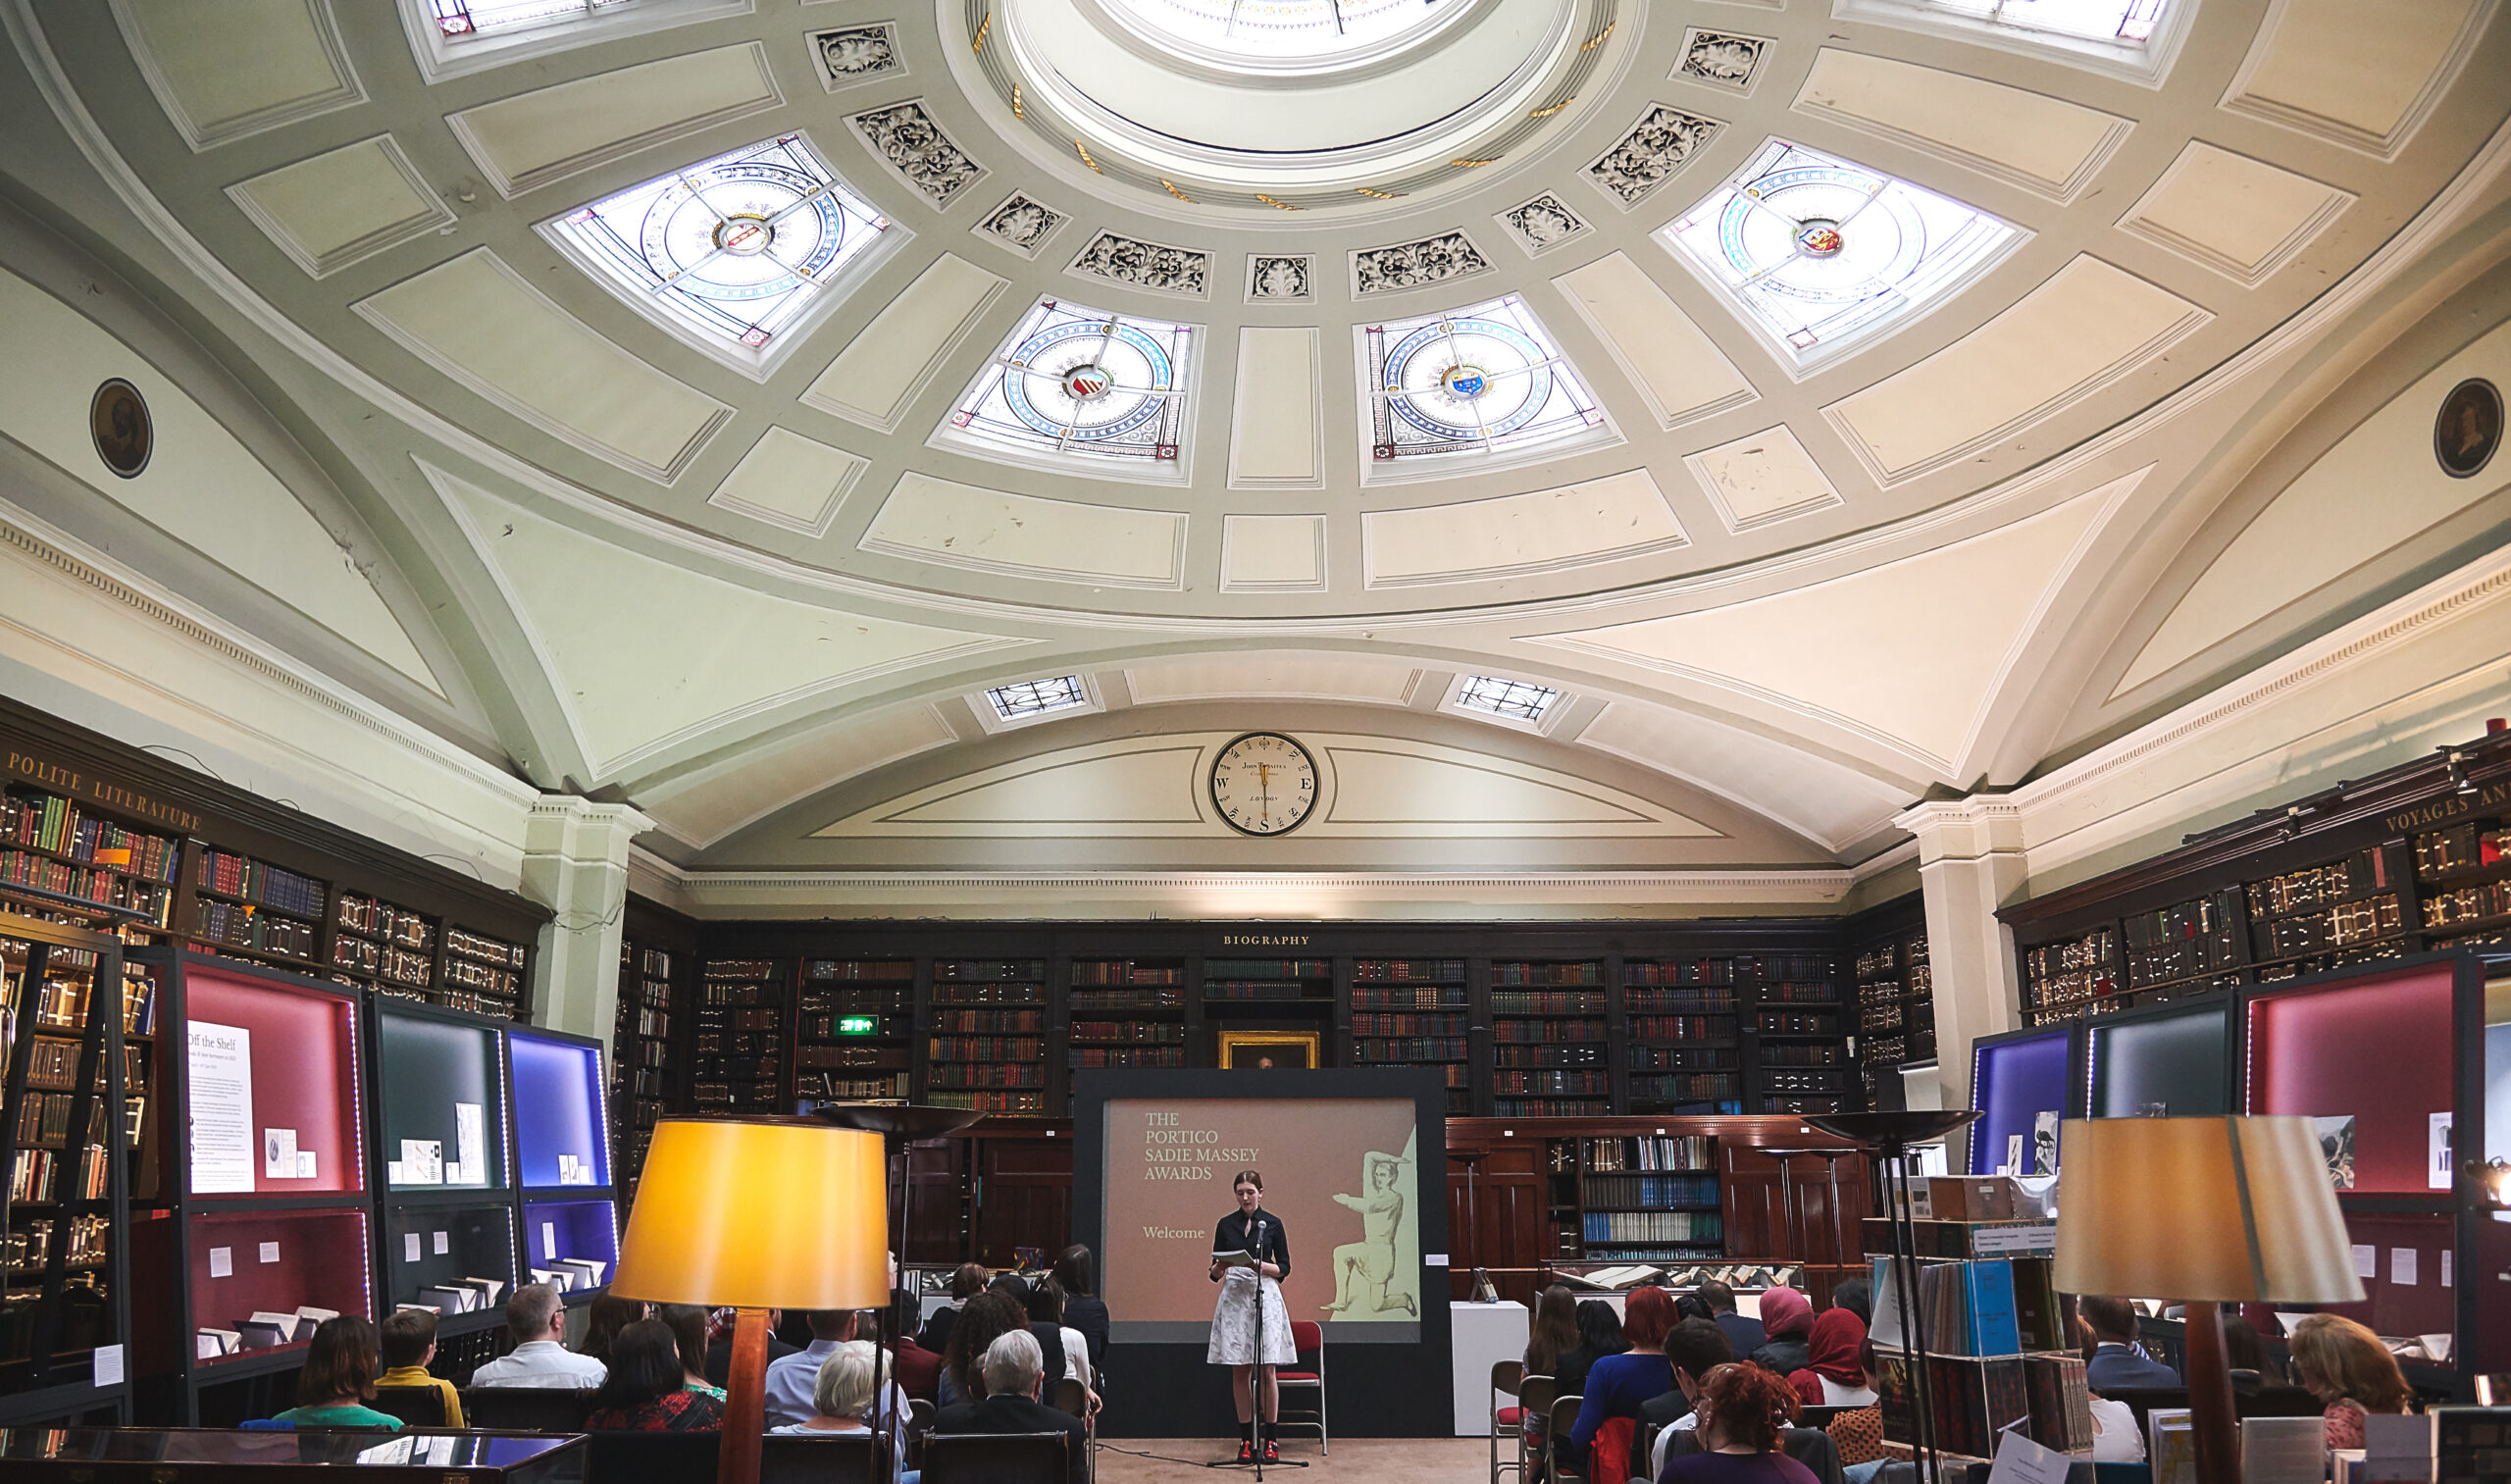 The Portico Library Manchester City of Literature